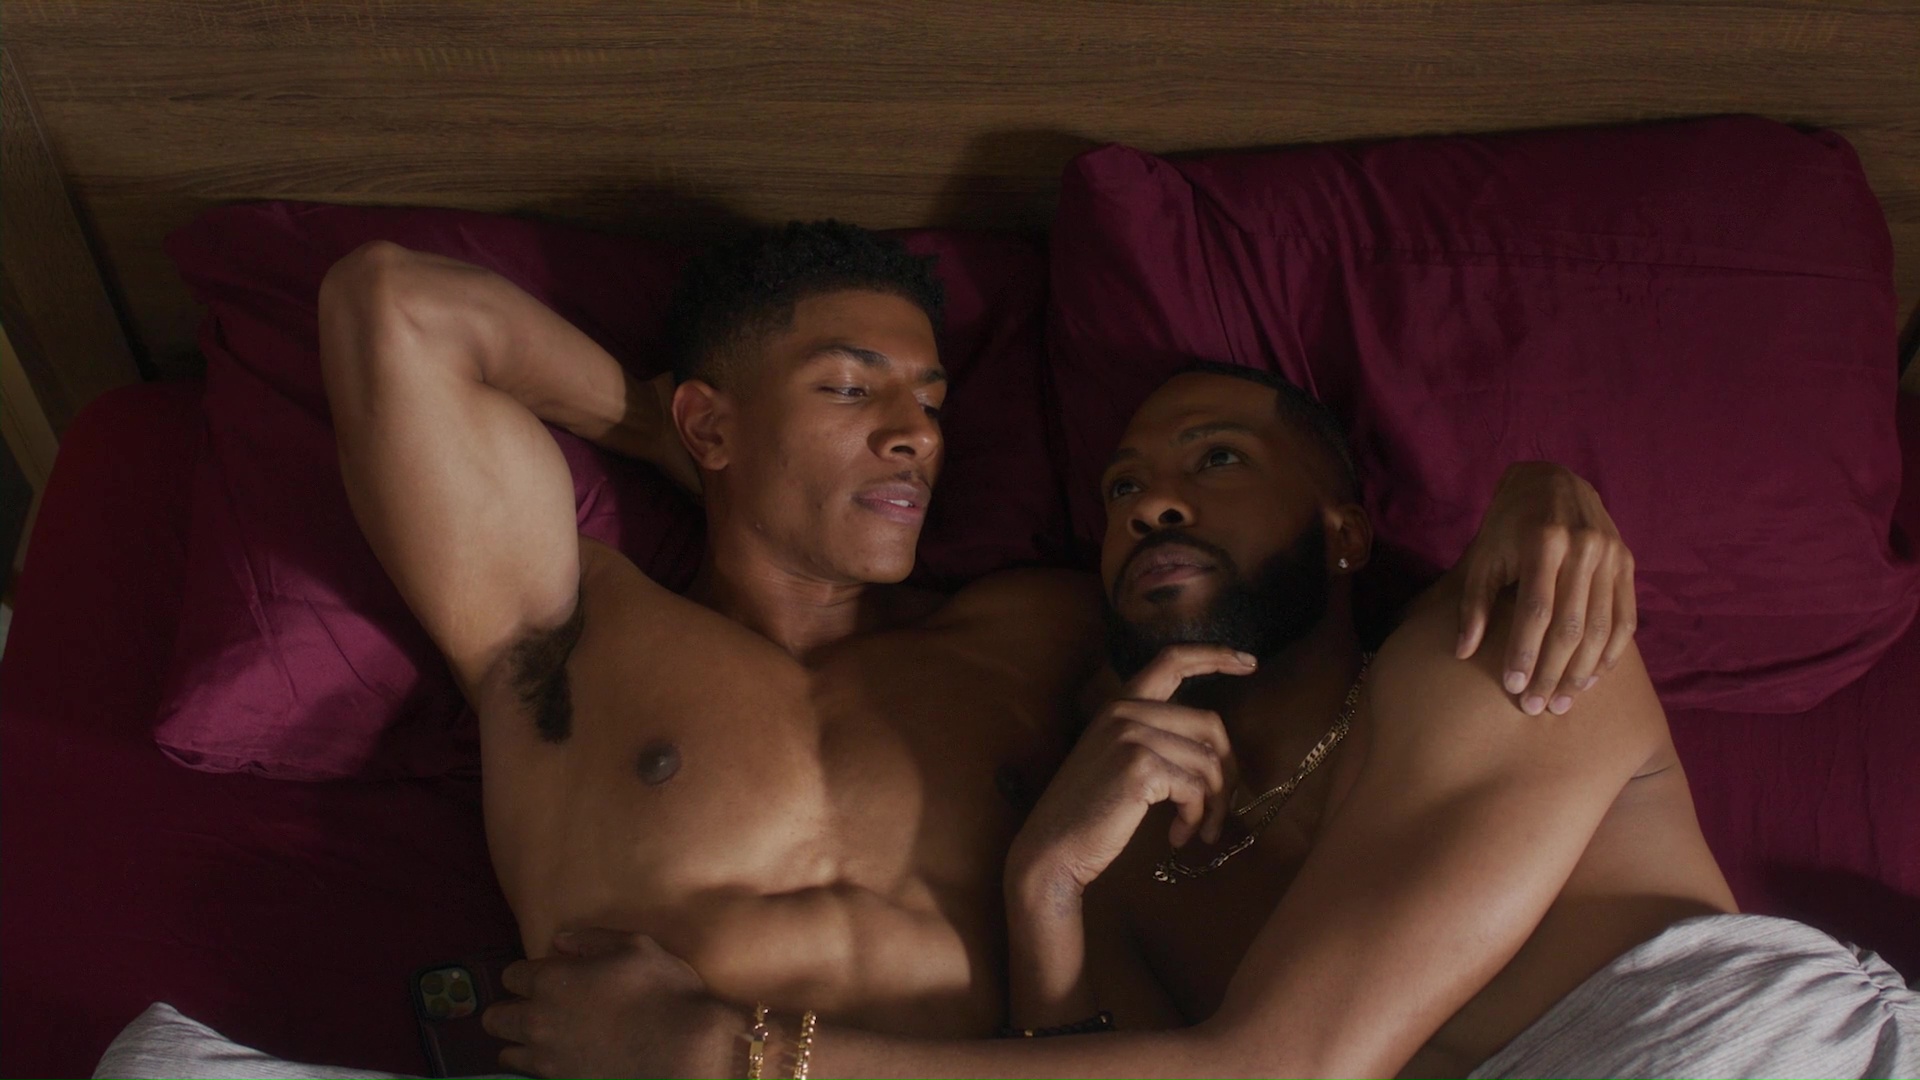 Shirtless Men On The Blog Daniel Augustin and Kendall Kyndall Scena Gay